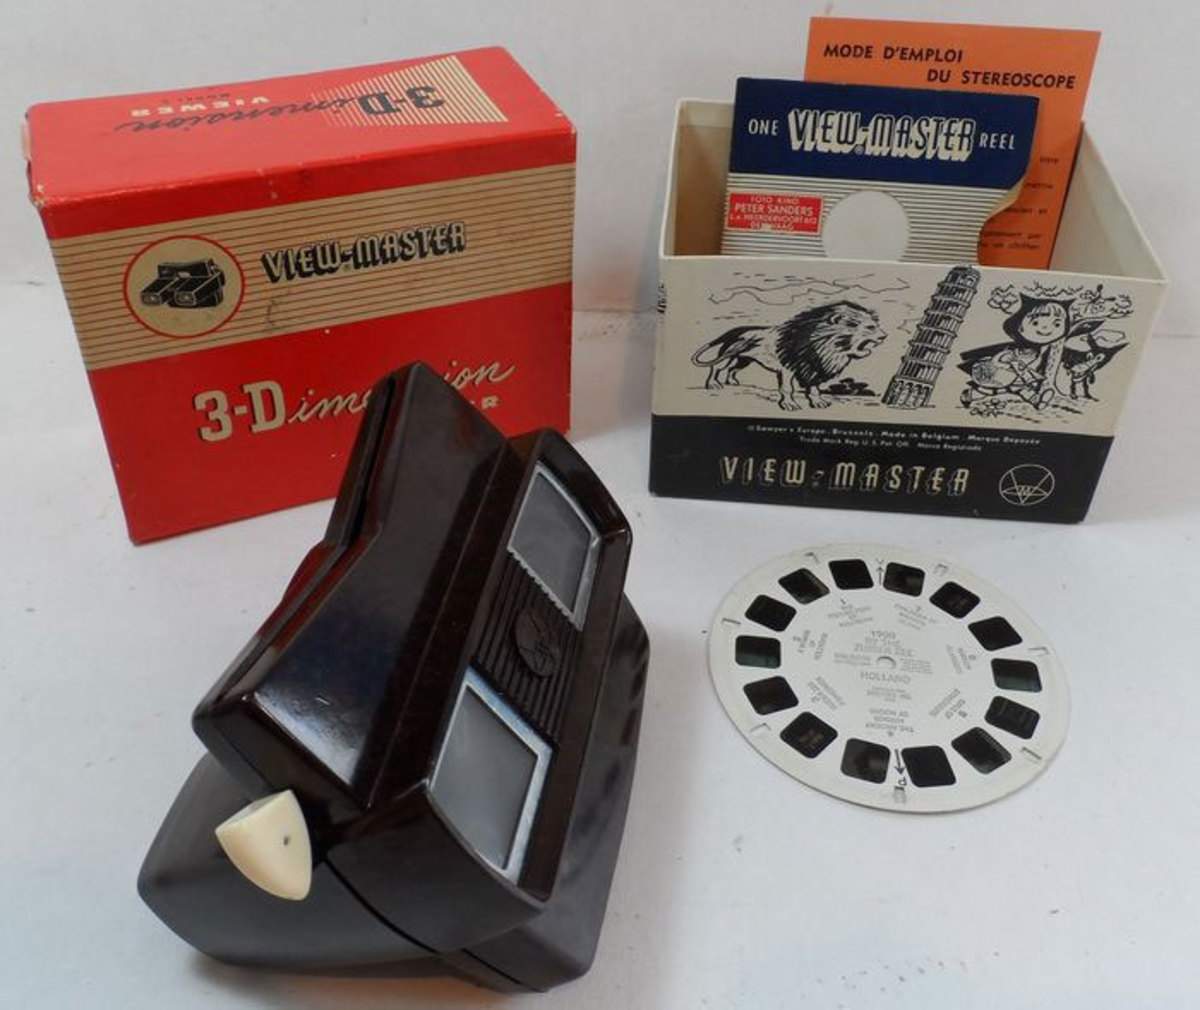 A View-Master reel holds 14 film transparencies in seven pairs, making up the seven stereoscopic images. The components of each pair are viewed simultaneously, one by each eye, thus simulating binocular depth perception.